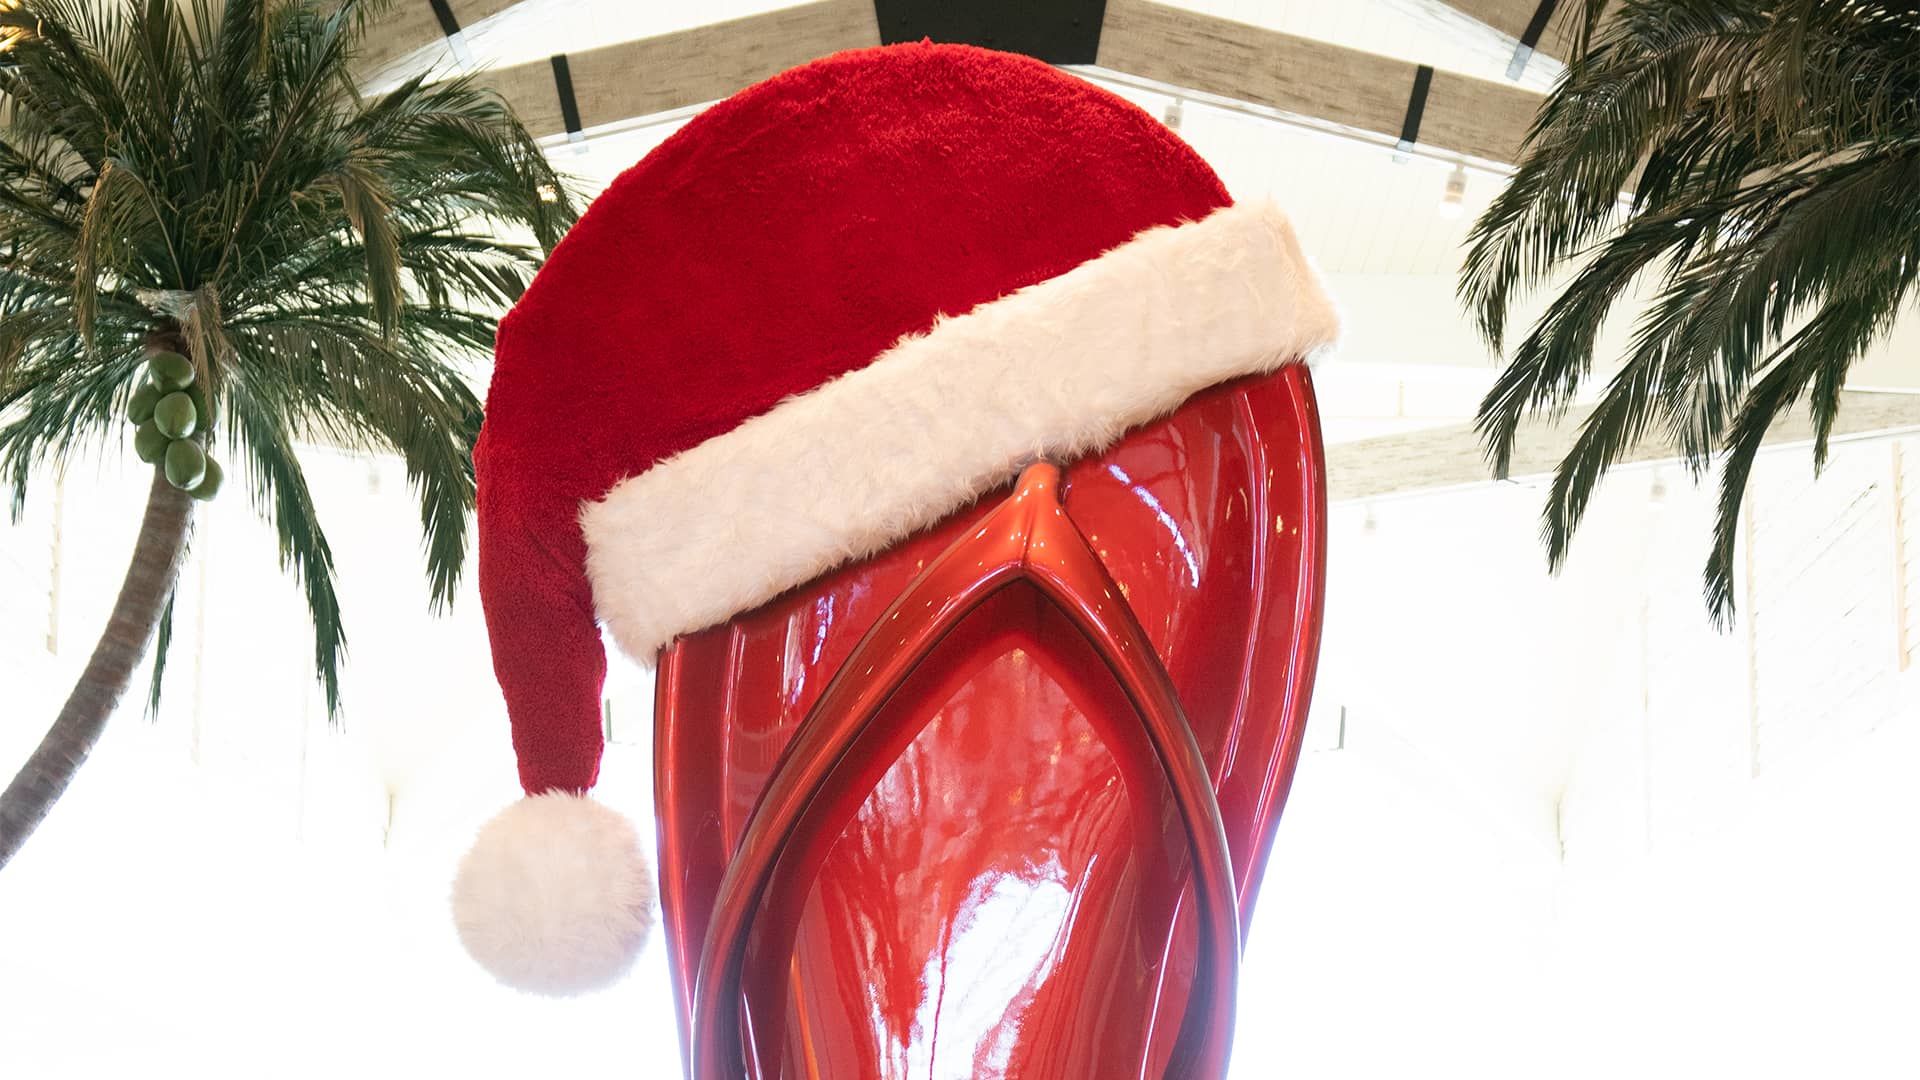 The giant Flip Flop in Margaritaville Resort Orlando’s main lobby topped with a large Santa Claus hat for the holidays.